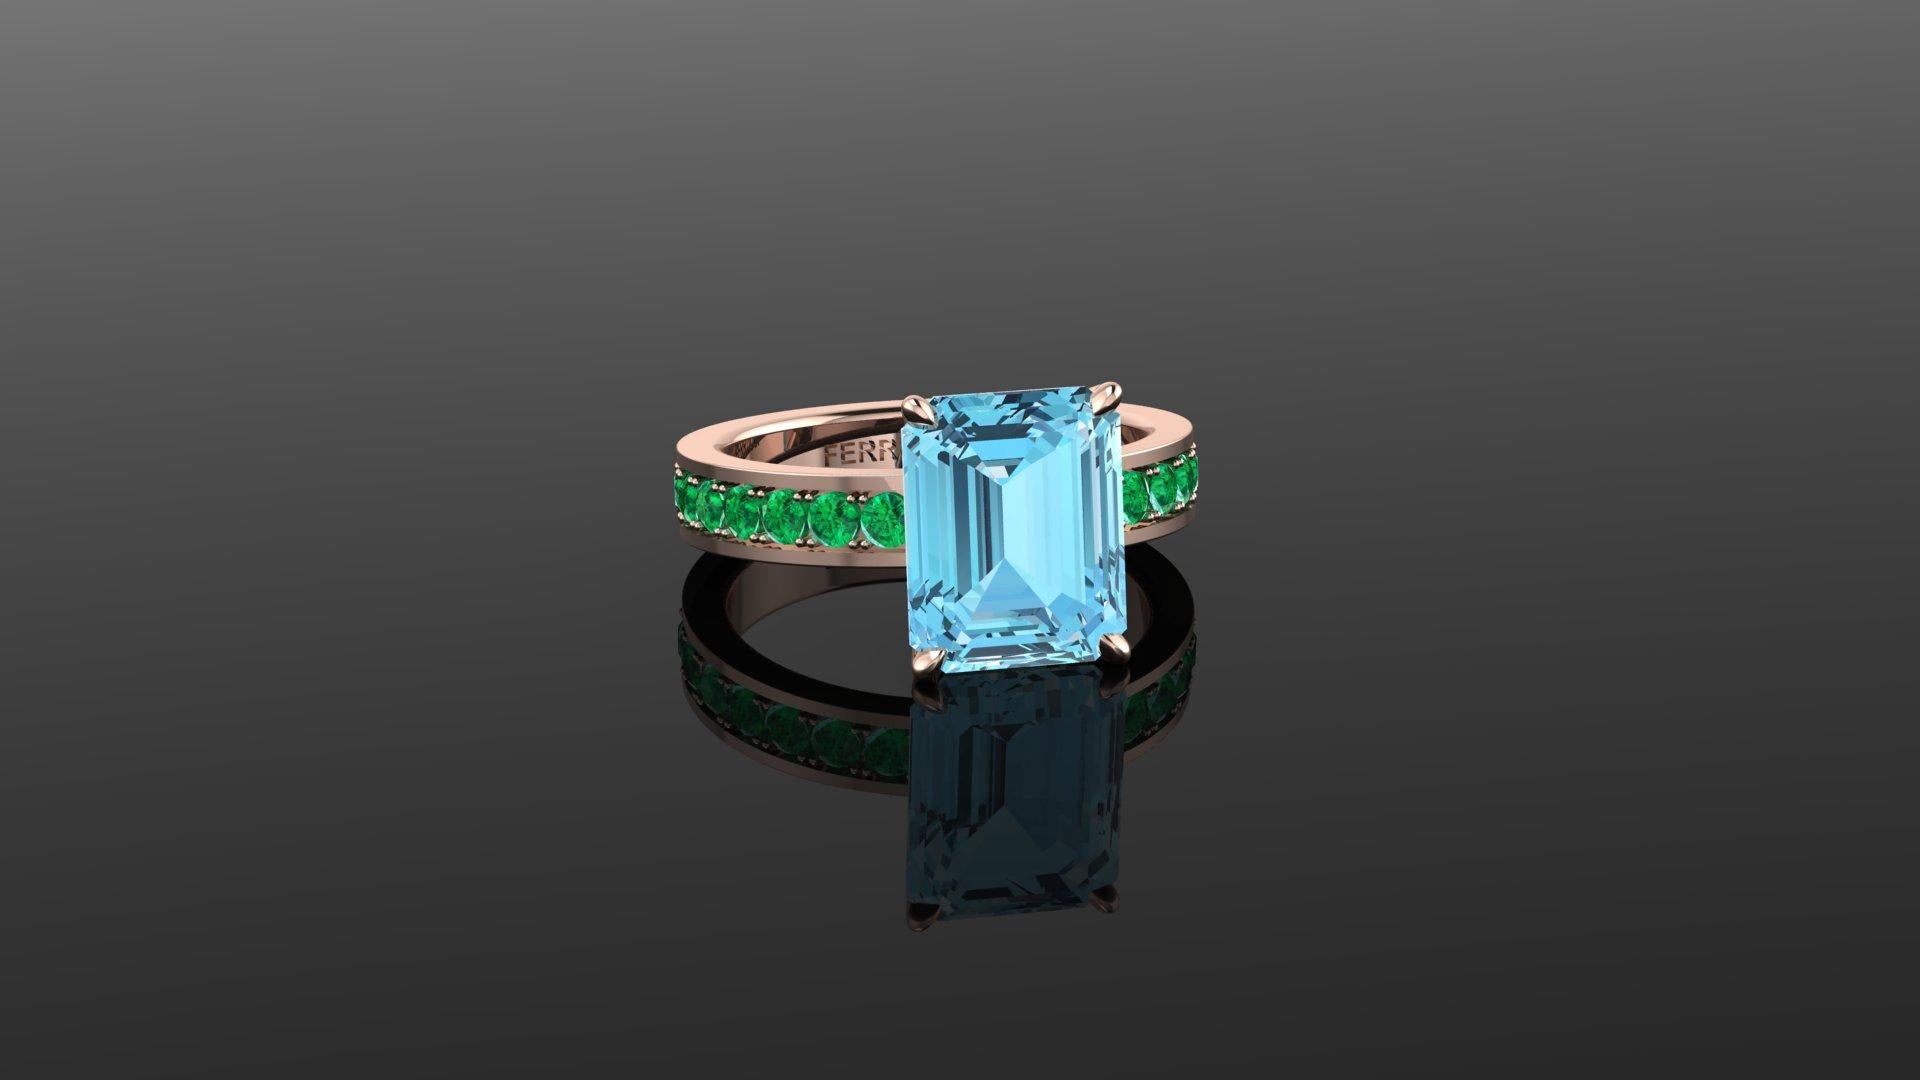 3.09 Carat Emerald Cut Aquamarine with Pave' of Emeralds 18k Rose Gold Ring For Sale 2